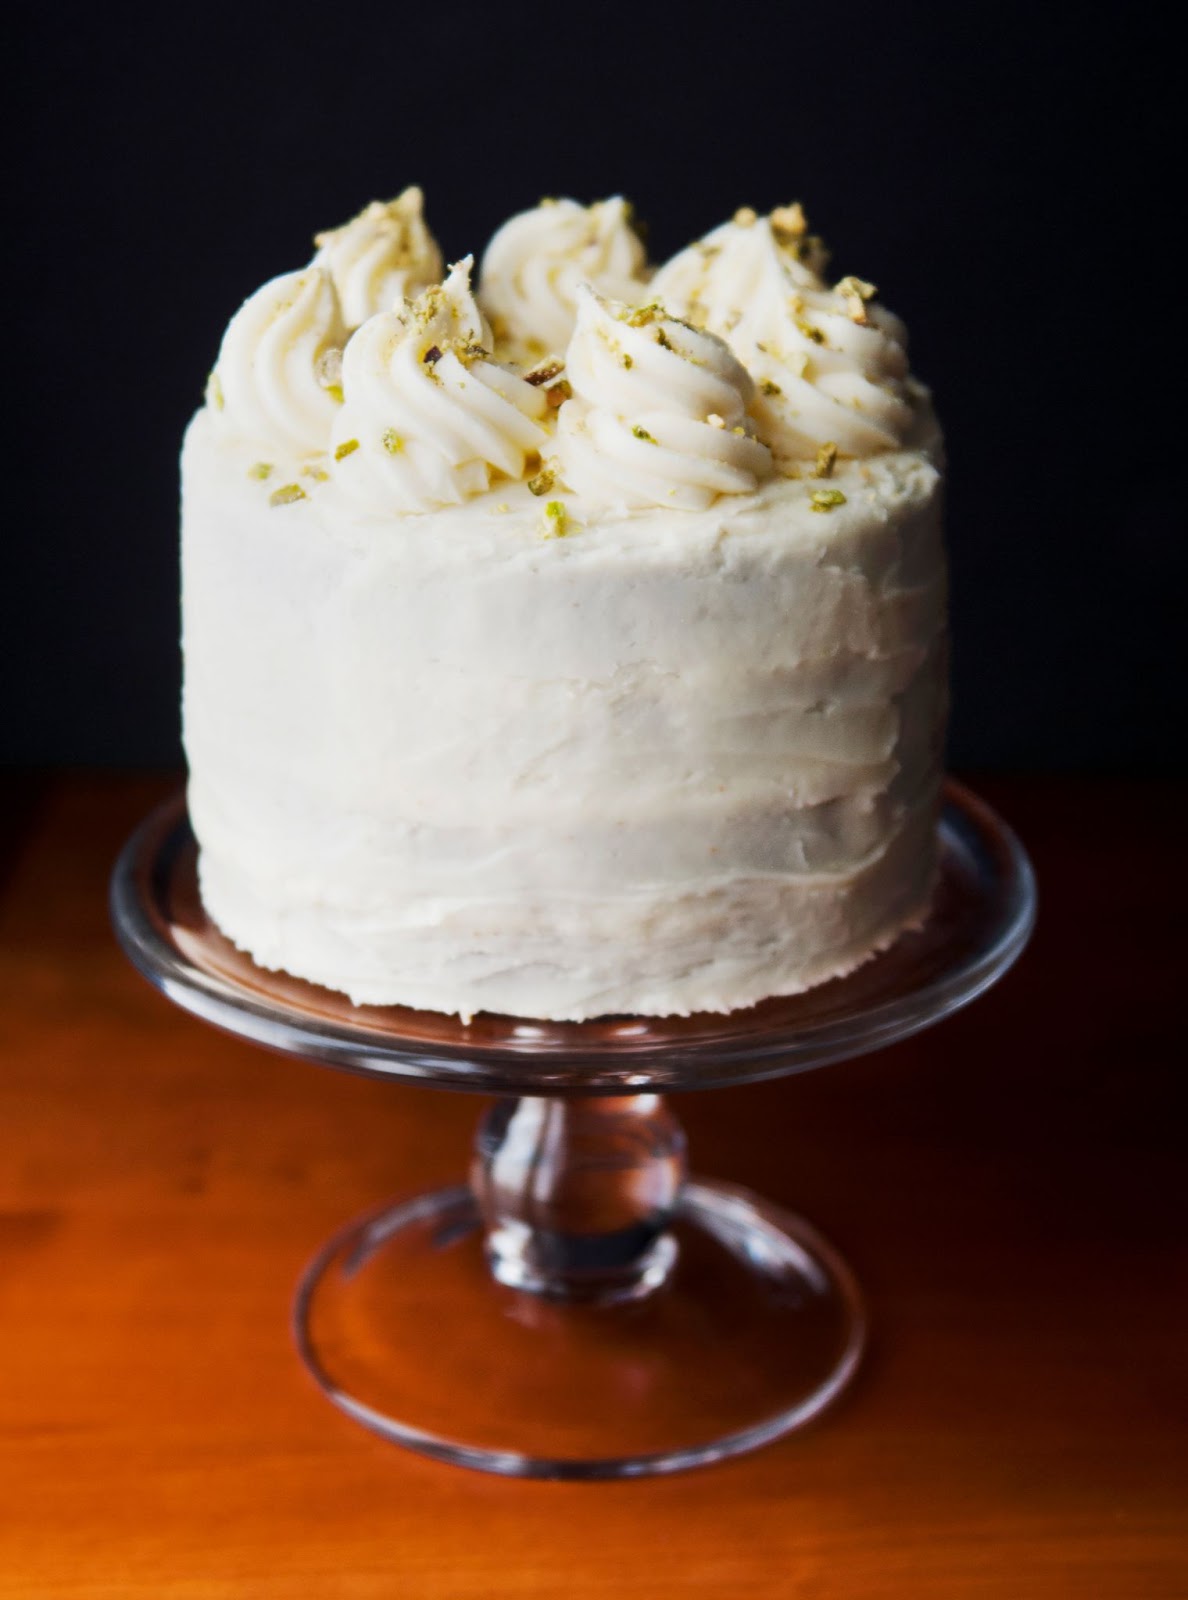 Frosted three layer carrot cake sits on a glass serving platter